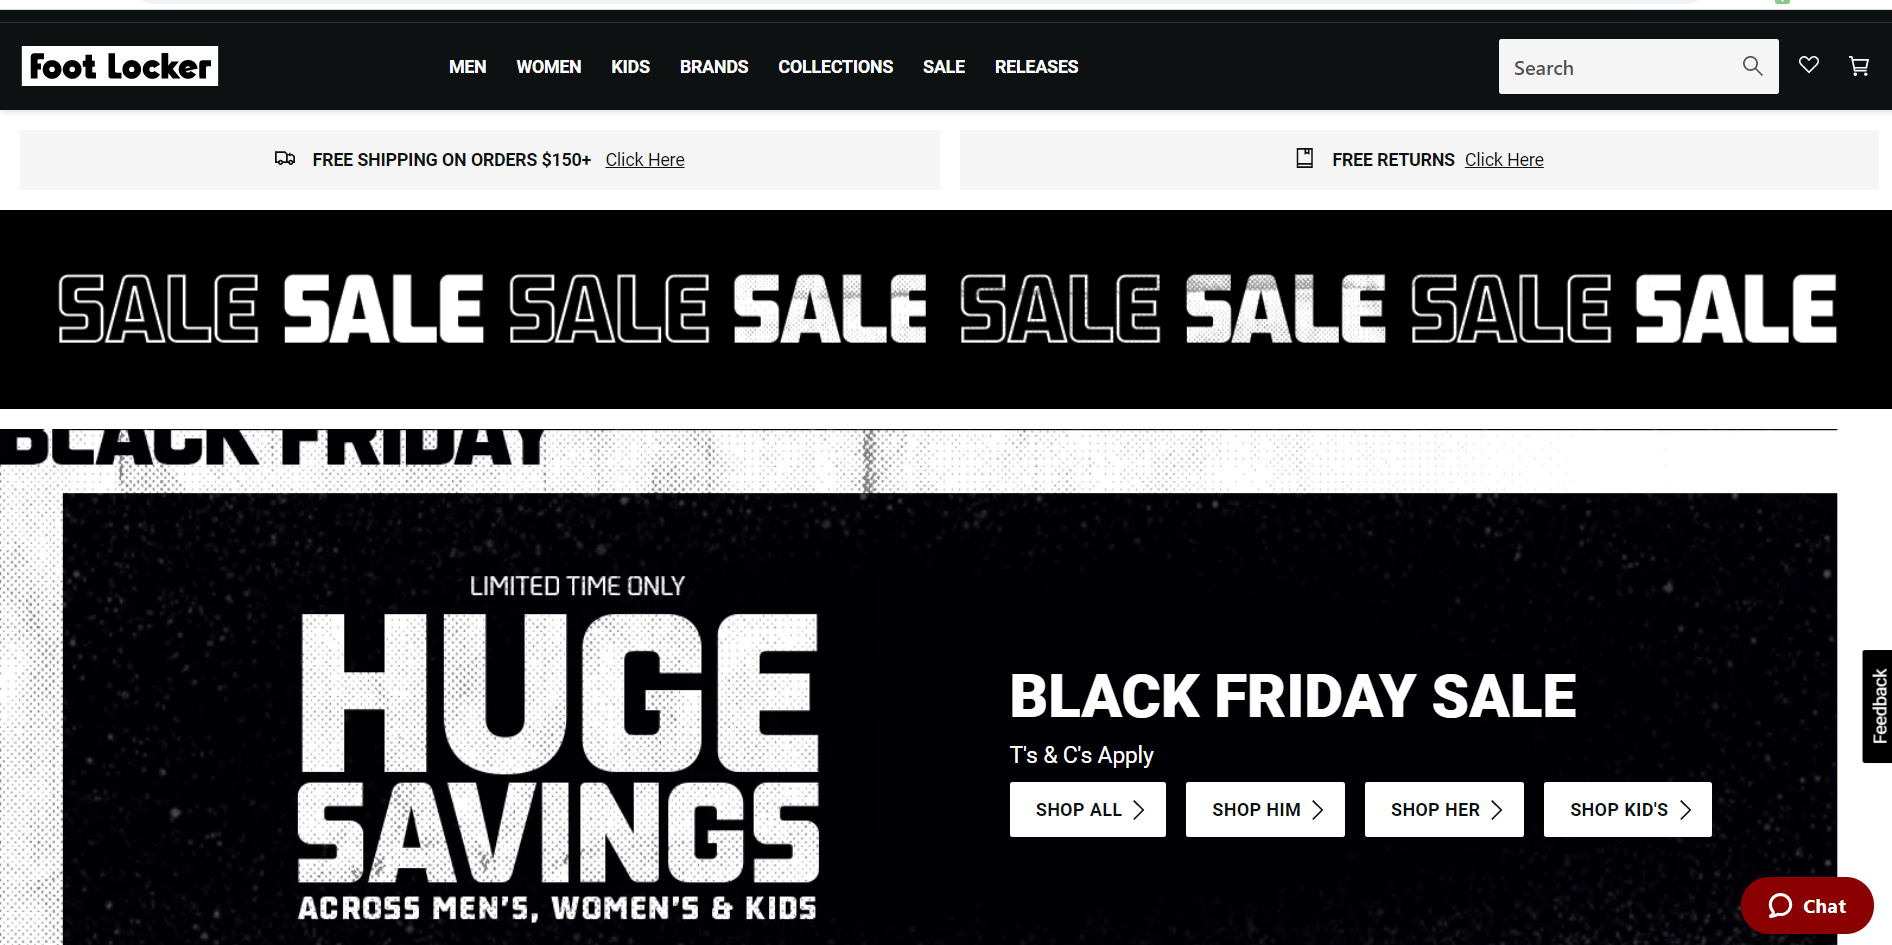 Foot Locker Black Friday up to 30% OFF on apparel, hats, footwear, bags & more